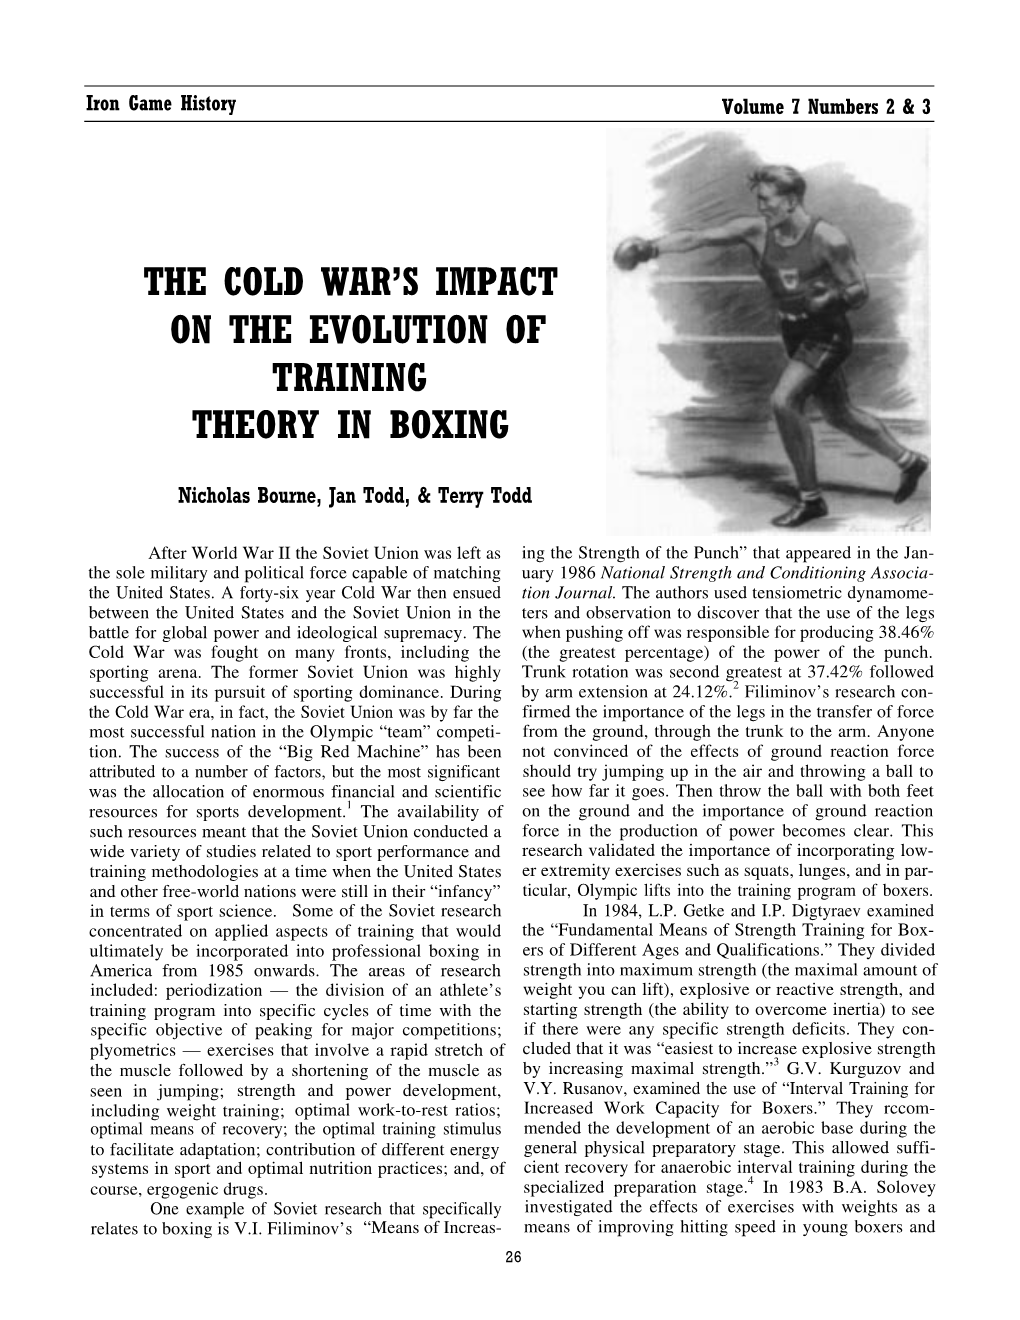 The Cold Wars Impact on the Evolution of Training Theory In